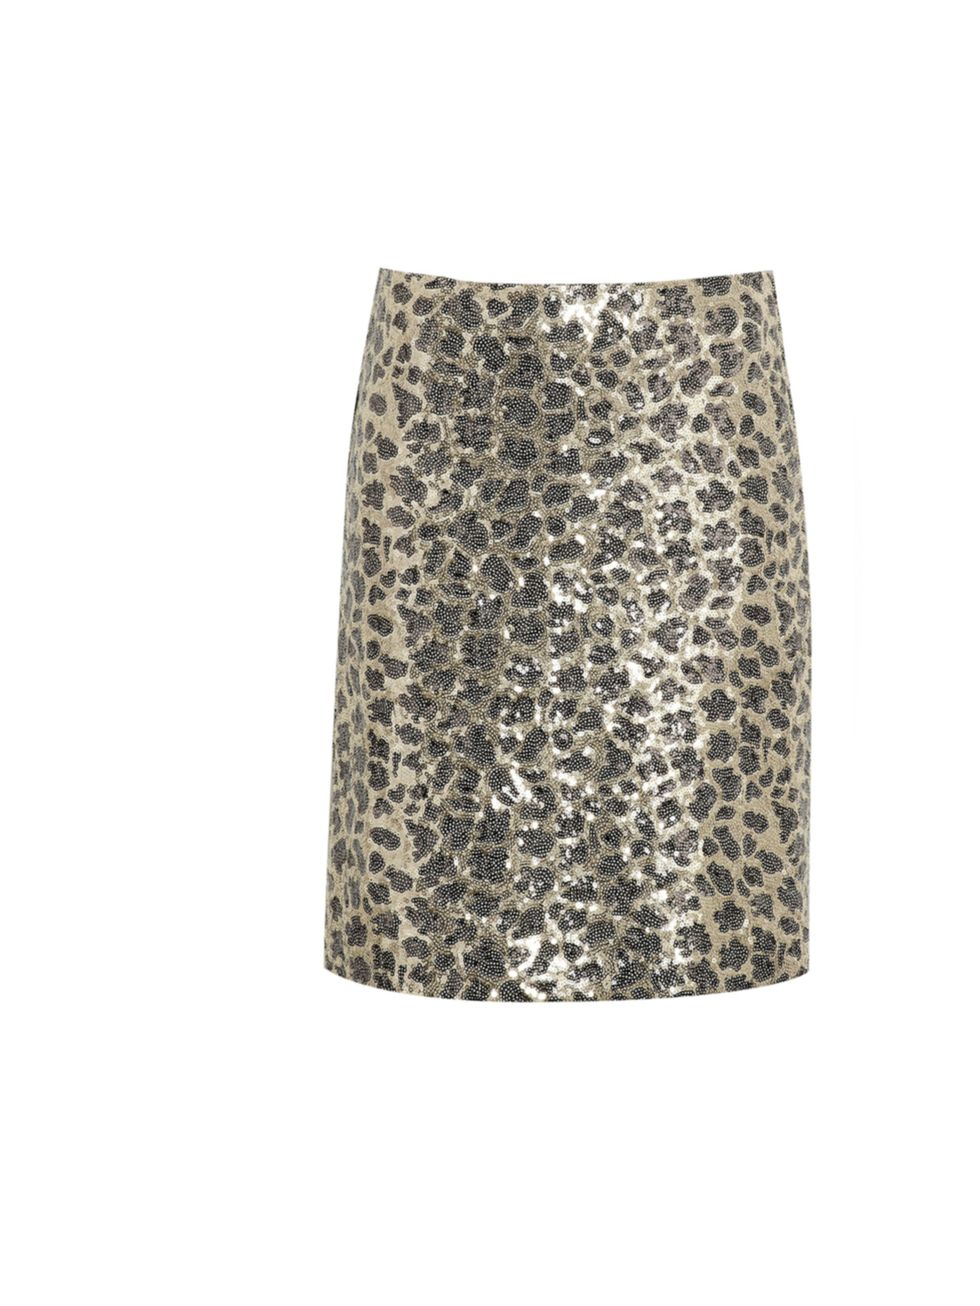 <p>Sequins and leopard print hook-up to create summers must-own party piece... Love Moschino leopard print sequin skirt, £200, at My-Wardrobe</p><p><a href="http://shopping.elleuk.com/browse?fts=love+moschino+leopard+skirt">BUY NOW</a></p>